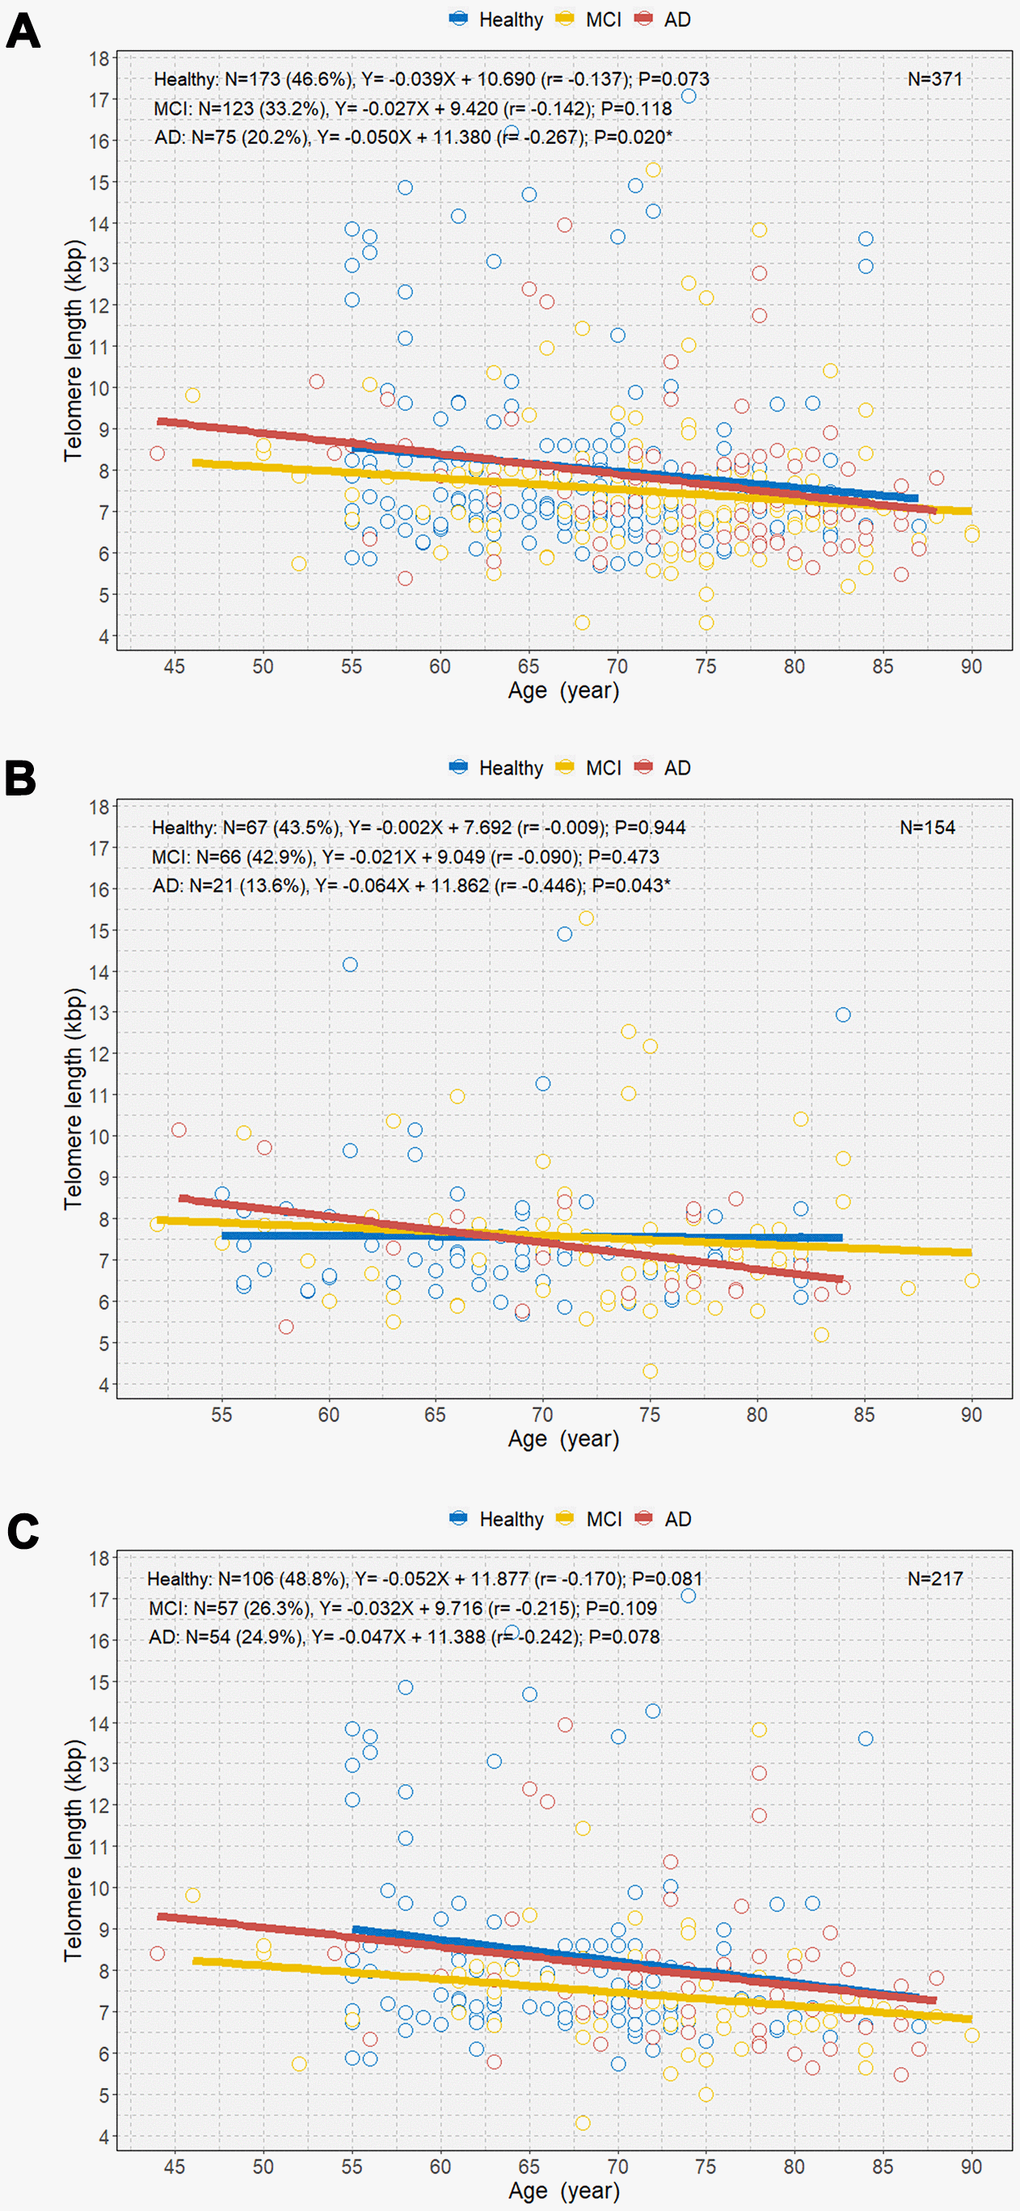 Scatterplot with linear regression line showing the associations between age and telomere length among healthy individuals and individuals with MCI and AD (A), age and telomere length among the three groups in men (B), and age and telomere length among the three groups in women (C). MCI=mild cognitive impairment; AD=Alzheimer’s disease. *P